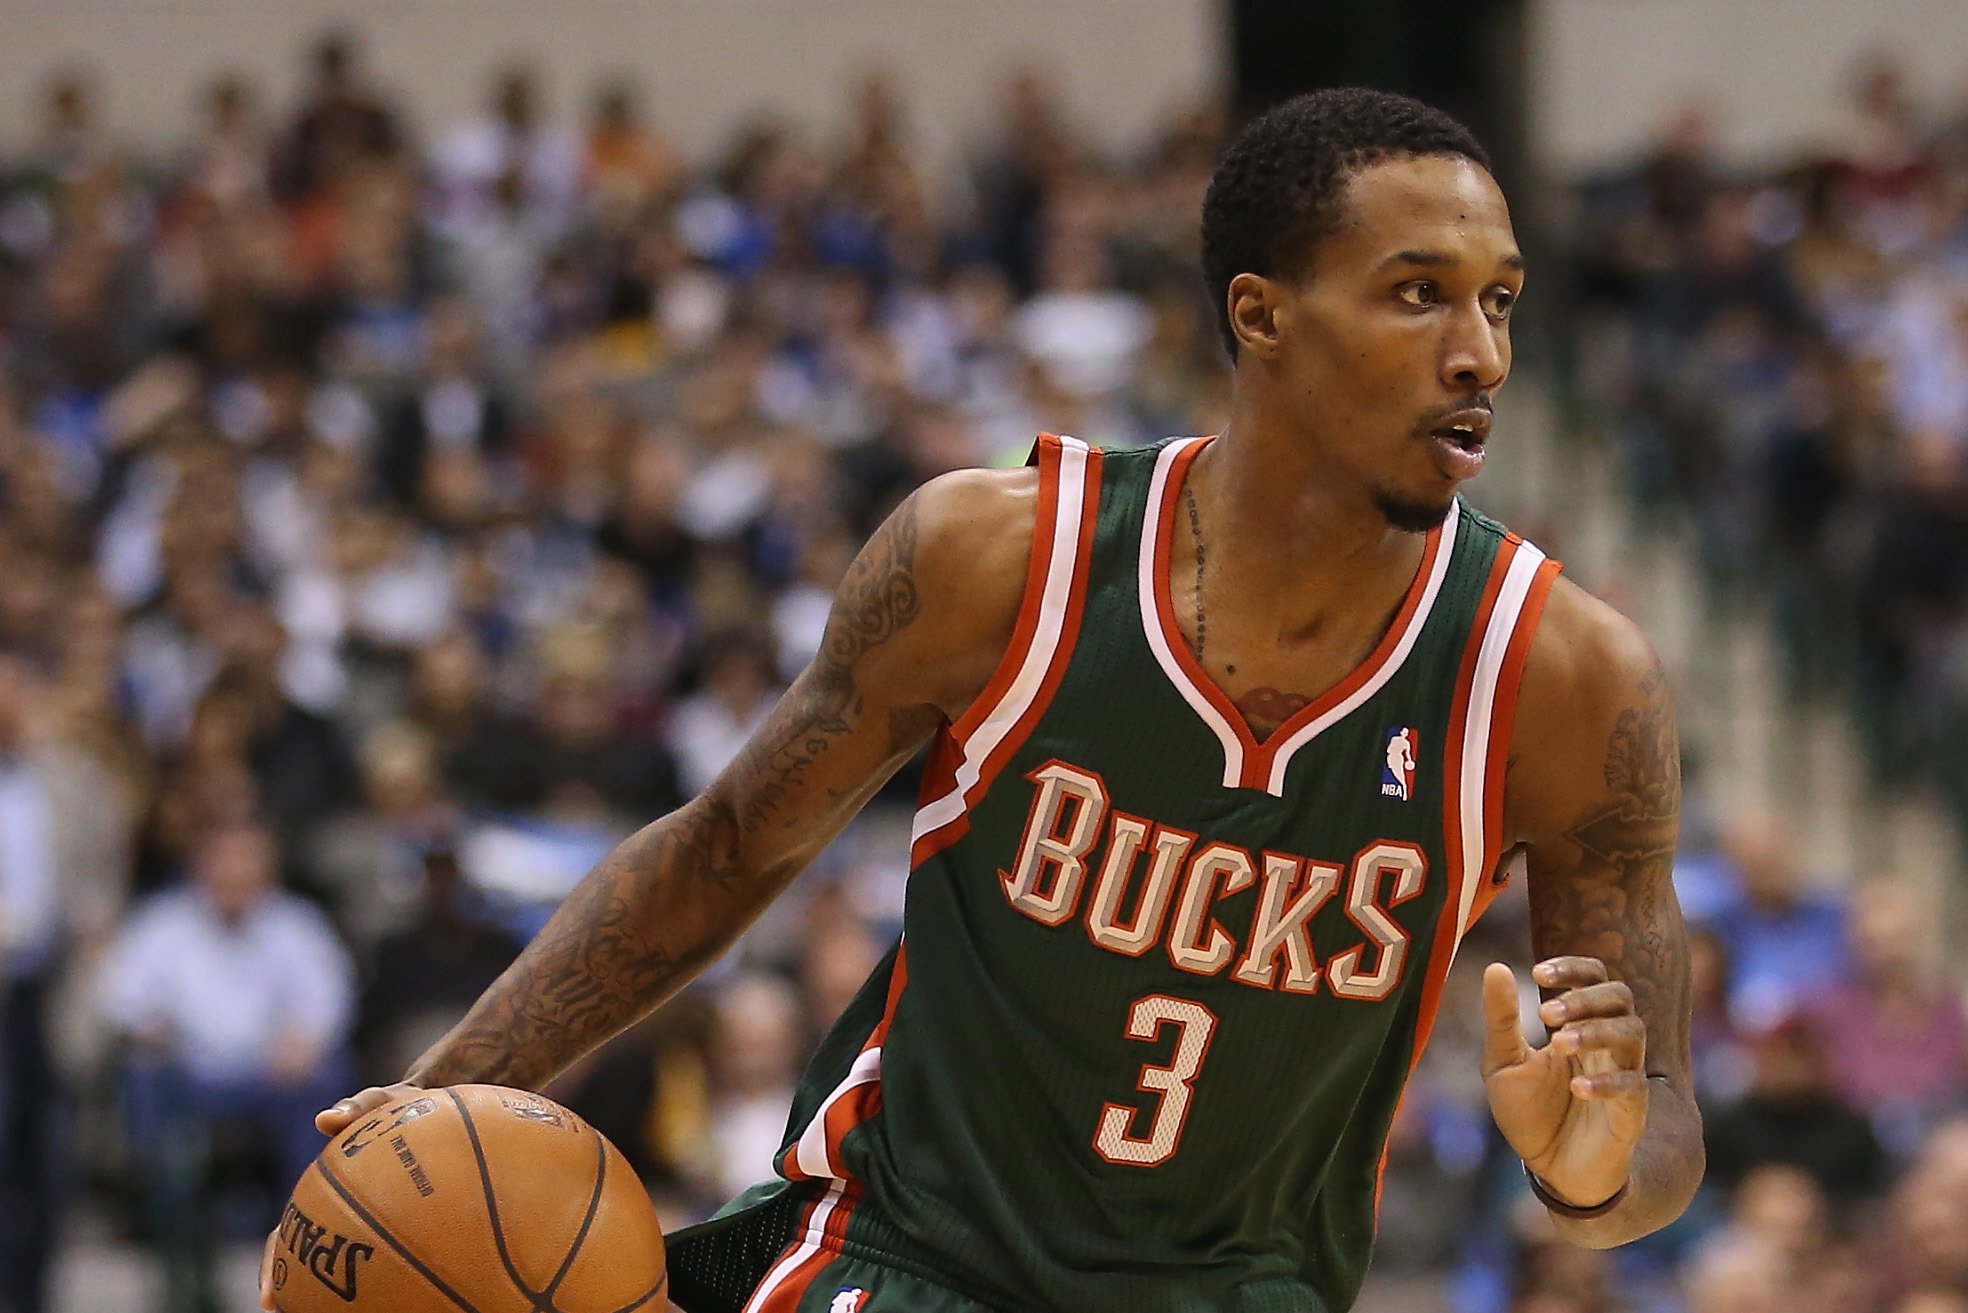 Brandon Jennings reflects on his the beginnings of his basketball